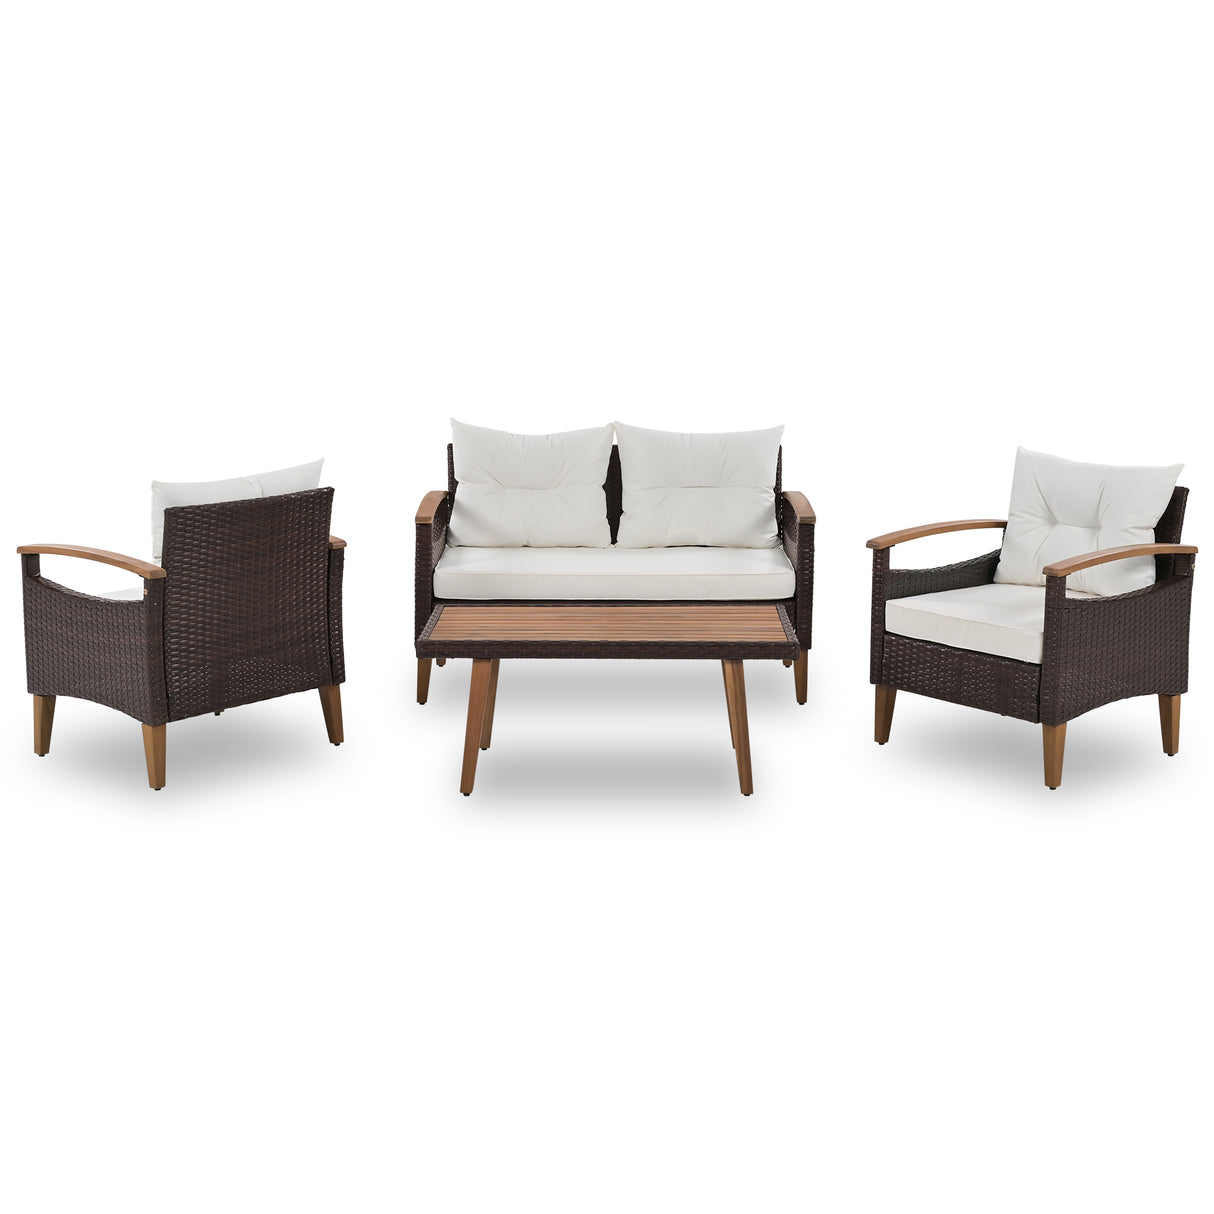 GO 4-Piece Garden Furniture,  Patio Seating Set, PE Rattan Outdoor Sofa Set, Wood Table and Legs, Brown and Beige